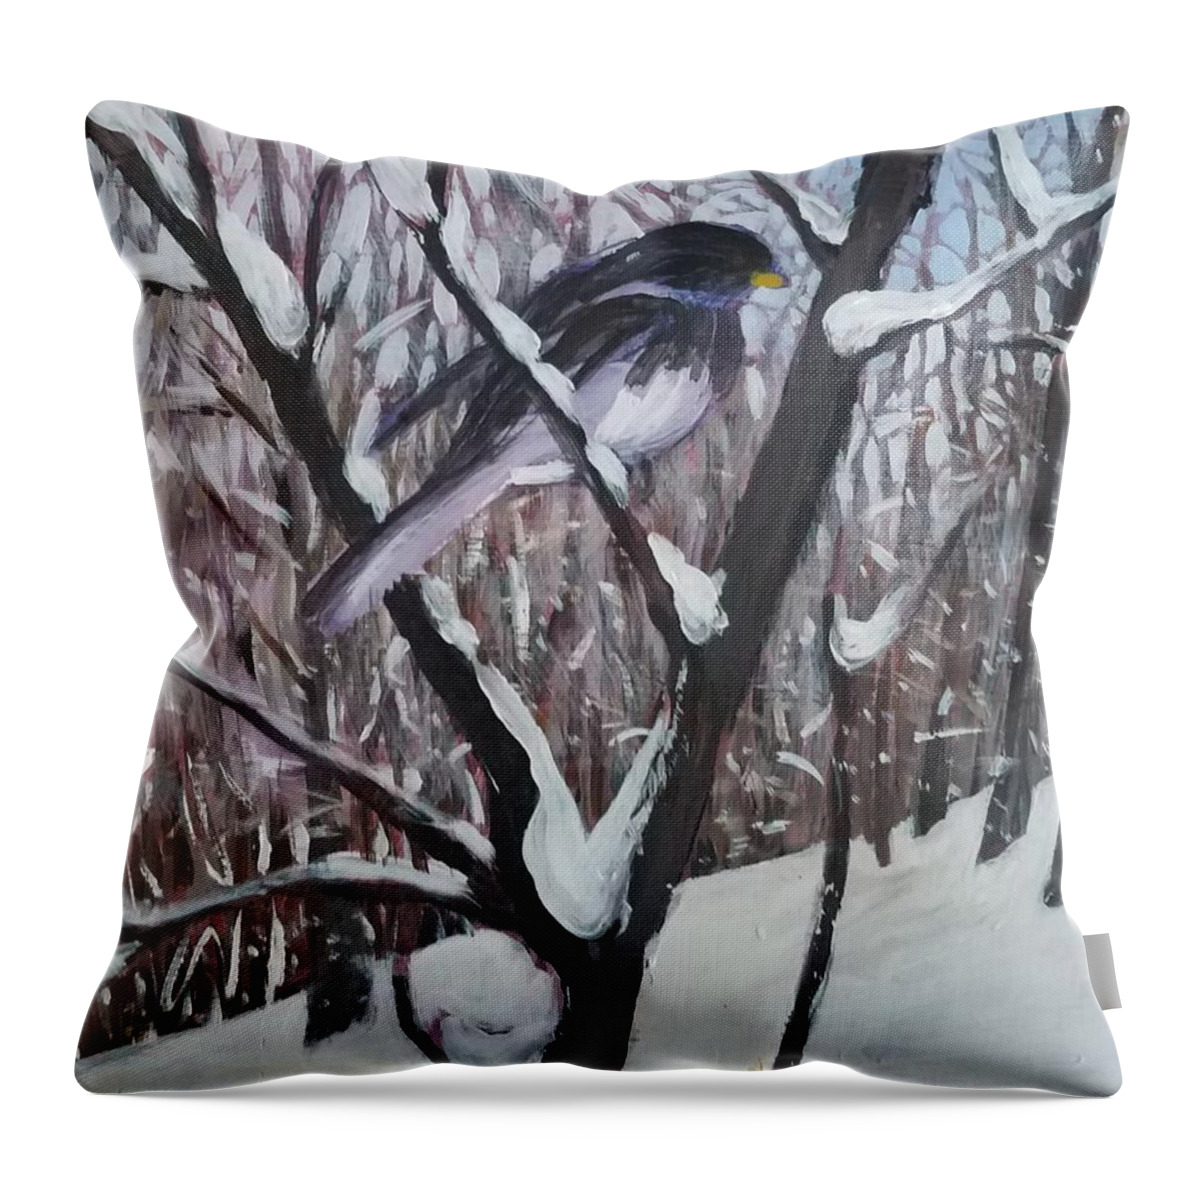 Bird Throw Pillow featuring the painting Wintry Bird by Tilly Strauss